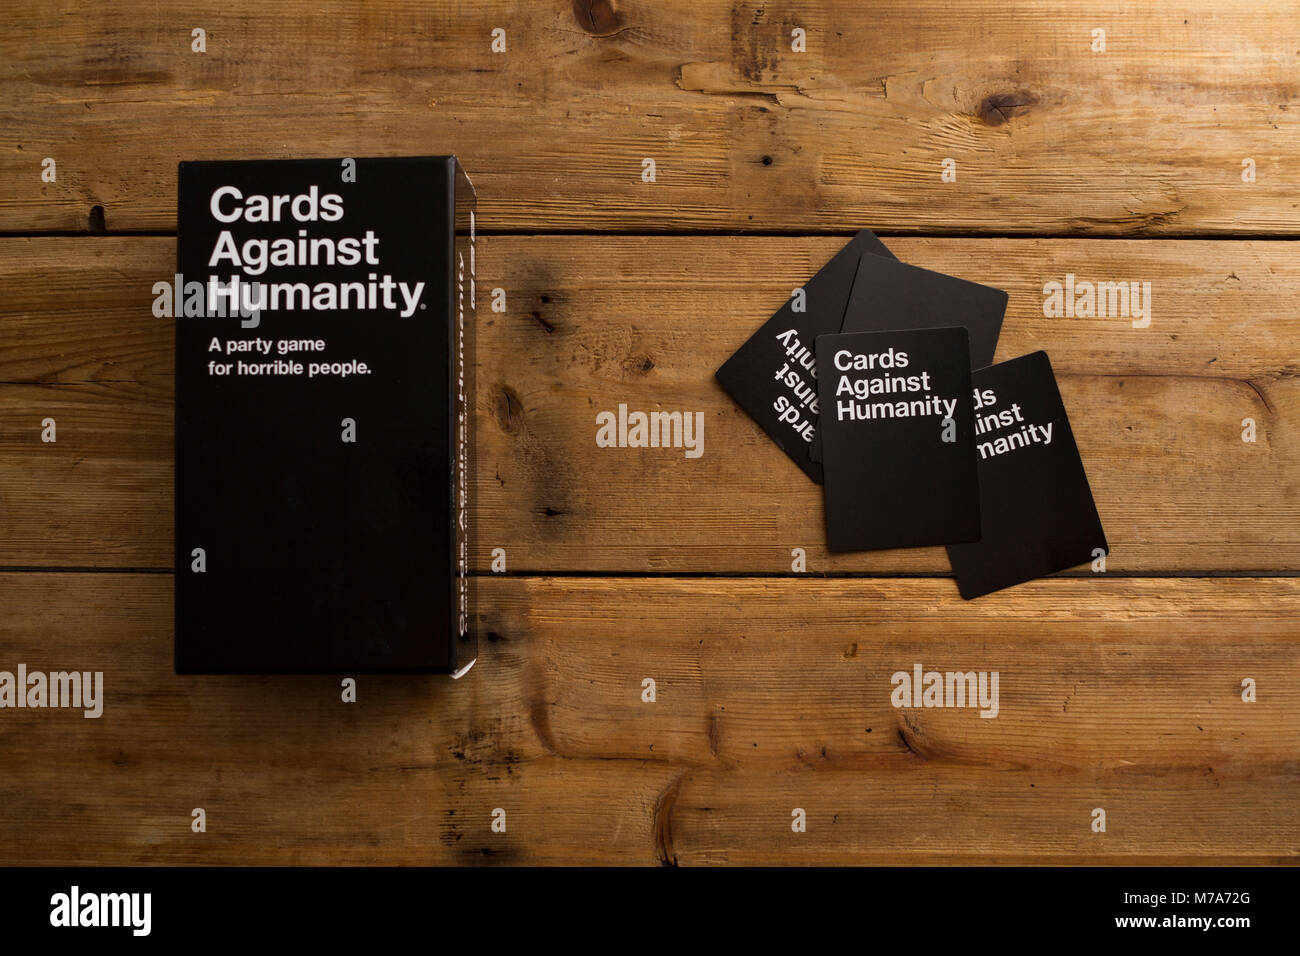 Cards Against Humanity, A party game for horrible people, displayed on a wooden table Stock Photo